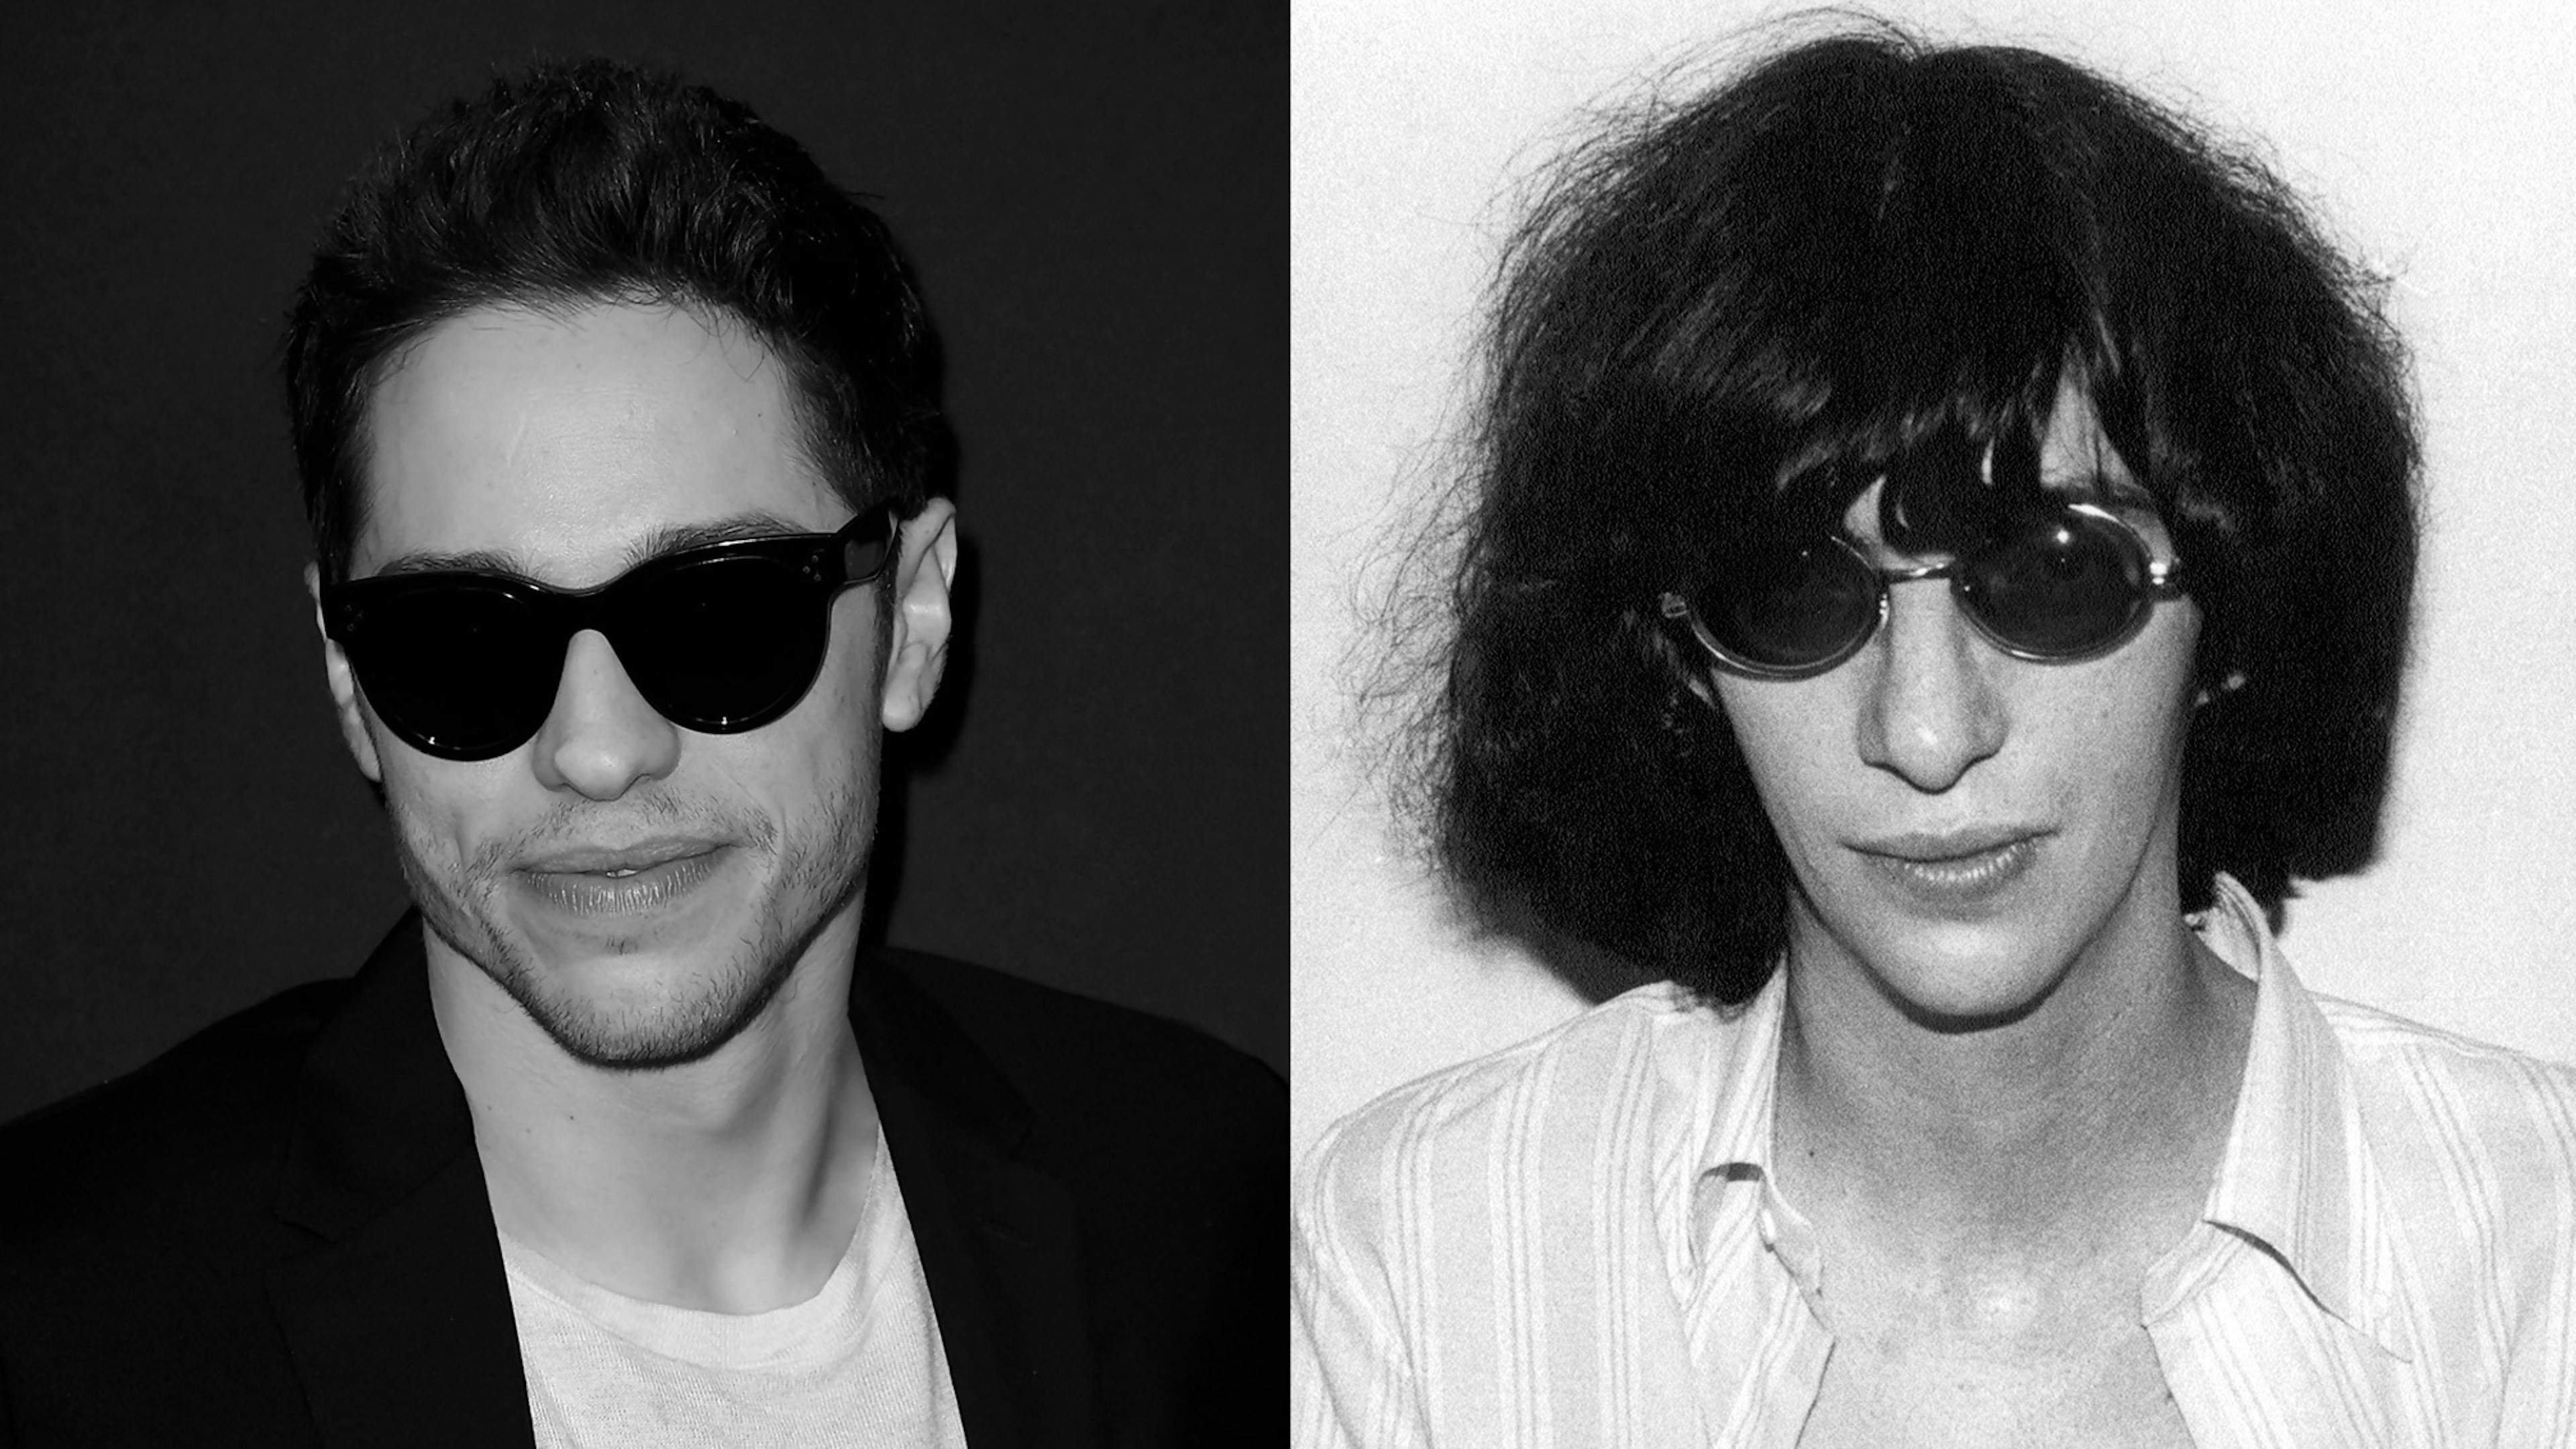 Pete Davidson is “really f*cking nervous” about playing Joey Ramone in Netflix biopic